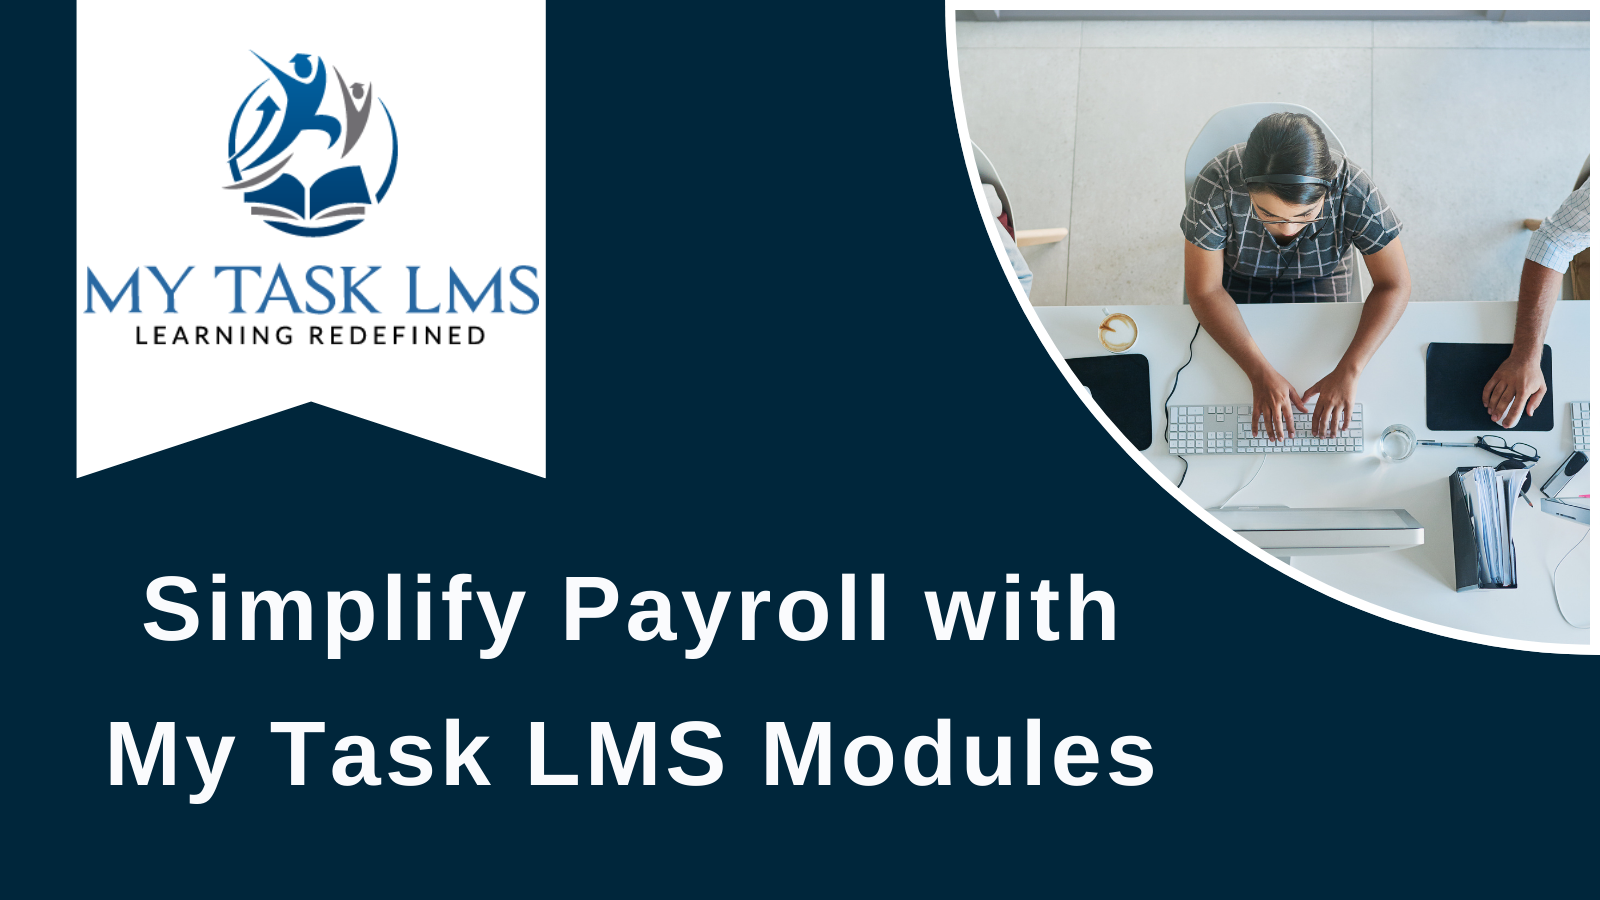 Simplify Payroll with My Task LMS Modules